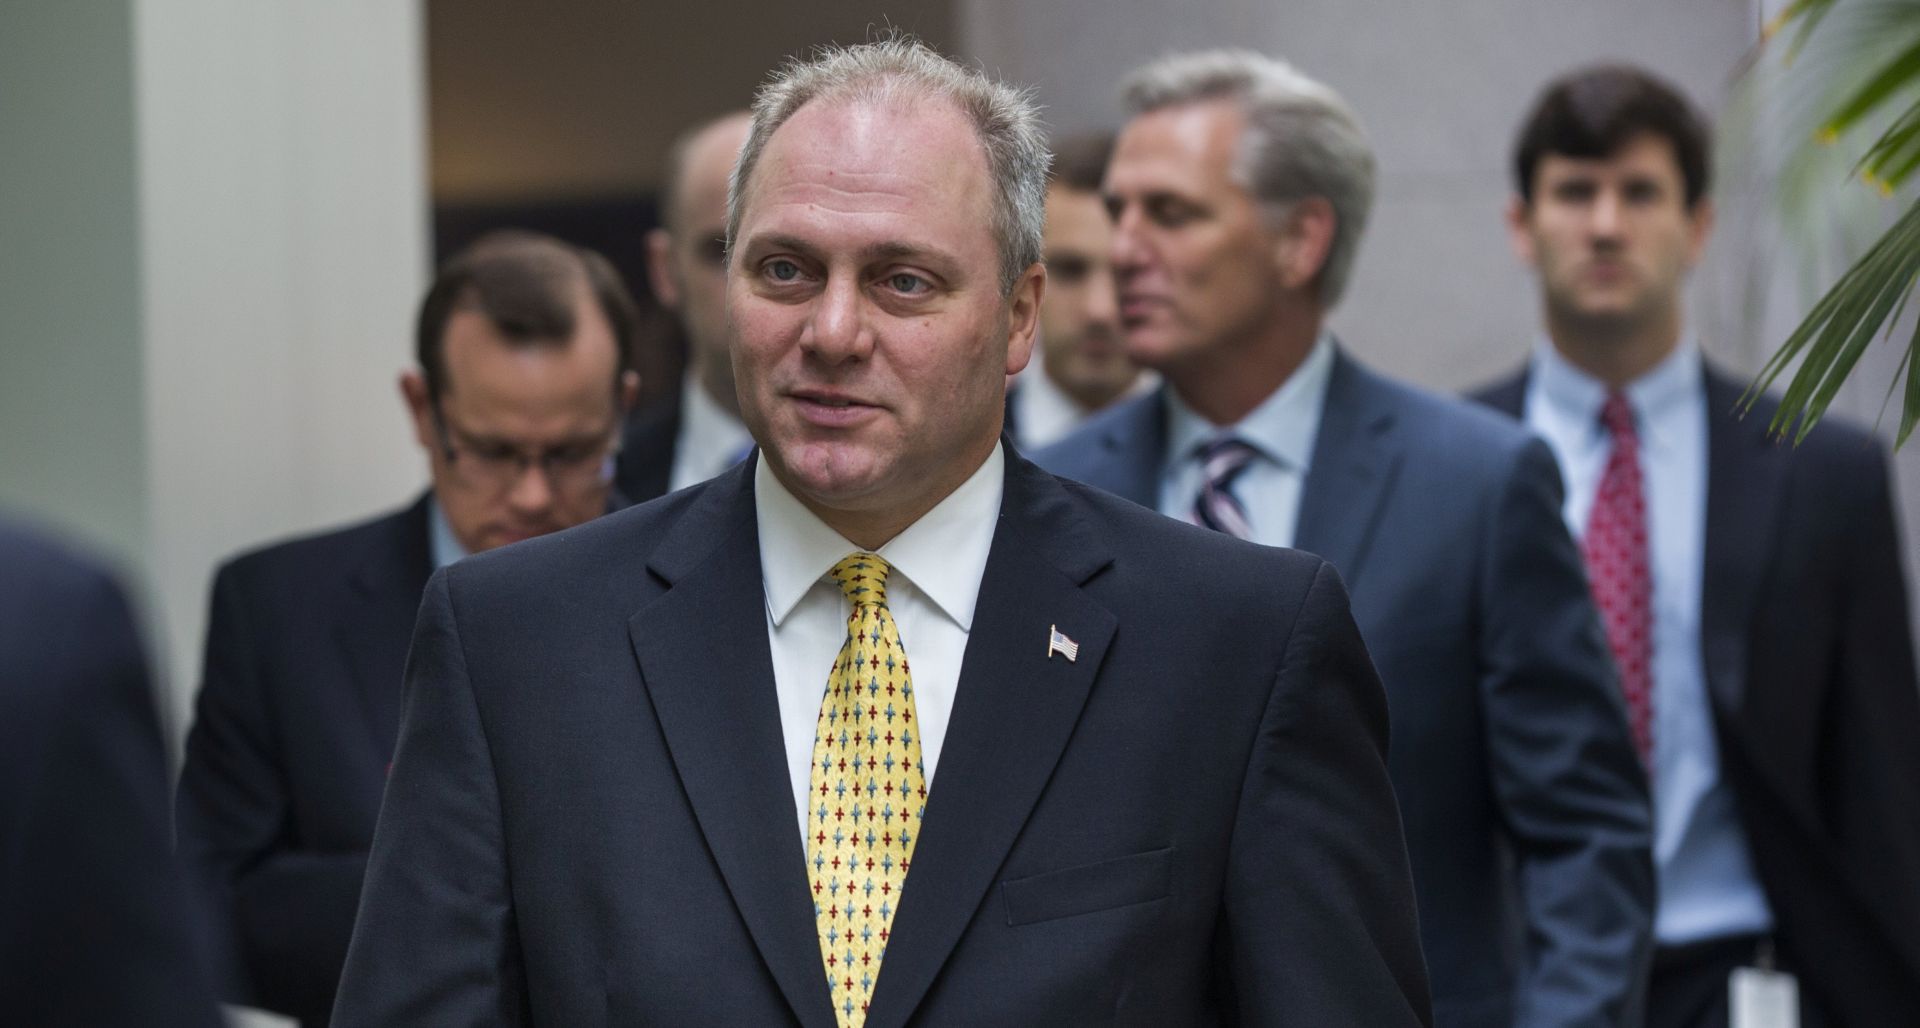 epa06029167 (FILE) - Republican House Whip from Louisiana Steve Scalise walks to a Republican conference to negotiate a border bill in the US Capitol in Washington, DC, USA, 01 August 2014.  (reissued 15 June 2017). US Republican House majority whip Steve Scalise remains in critical condition on 15 June 2017 after he and at least four others have been shot at during a congressional baseball game practice session in Alexandria outside Washington, DC on 14 June 2017.  EPA/JIM LO SCALZO